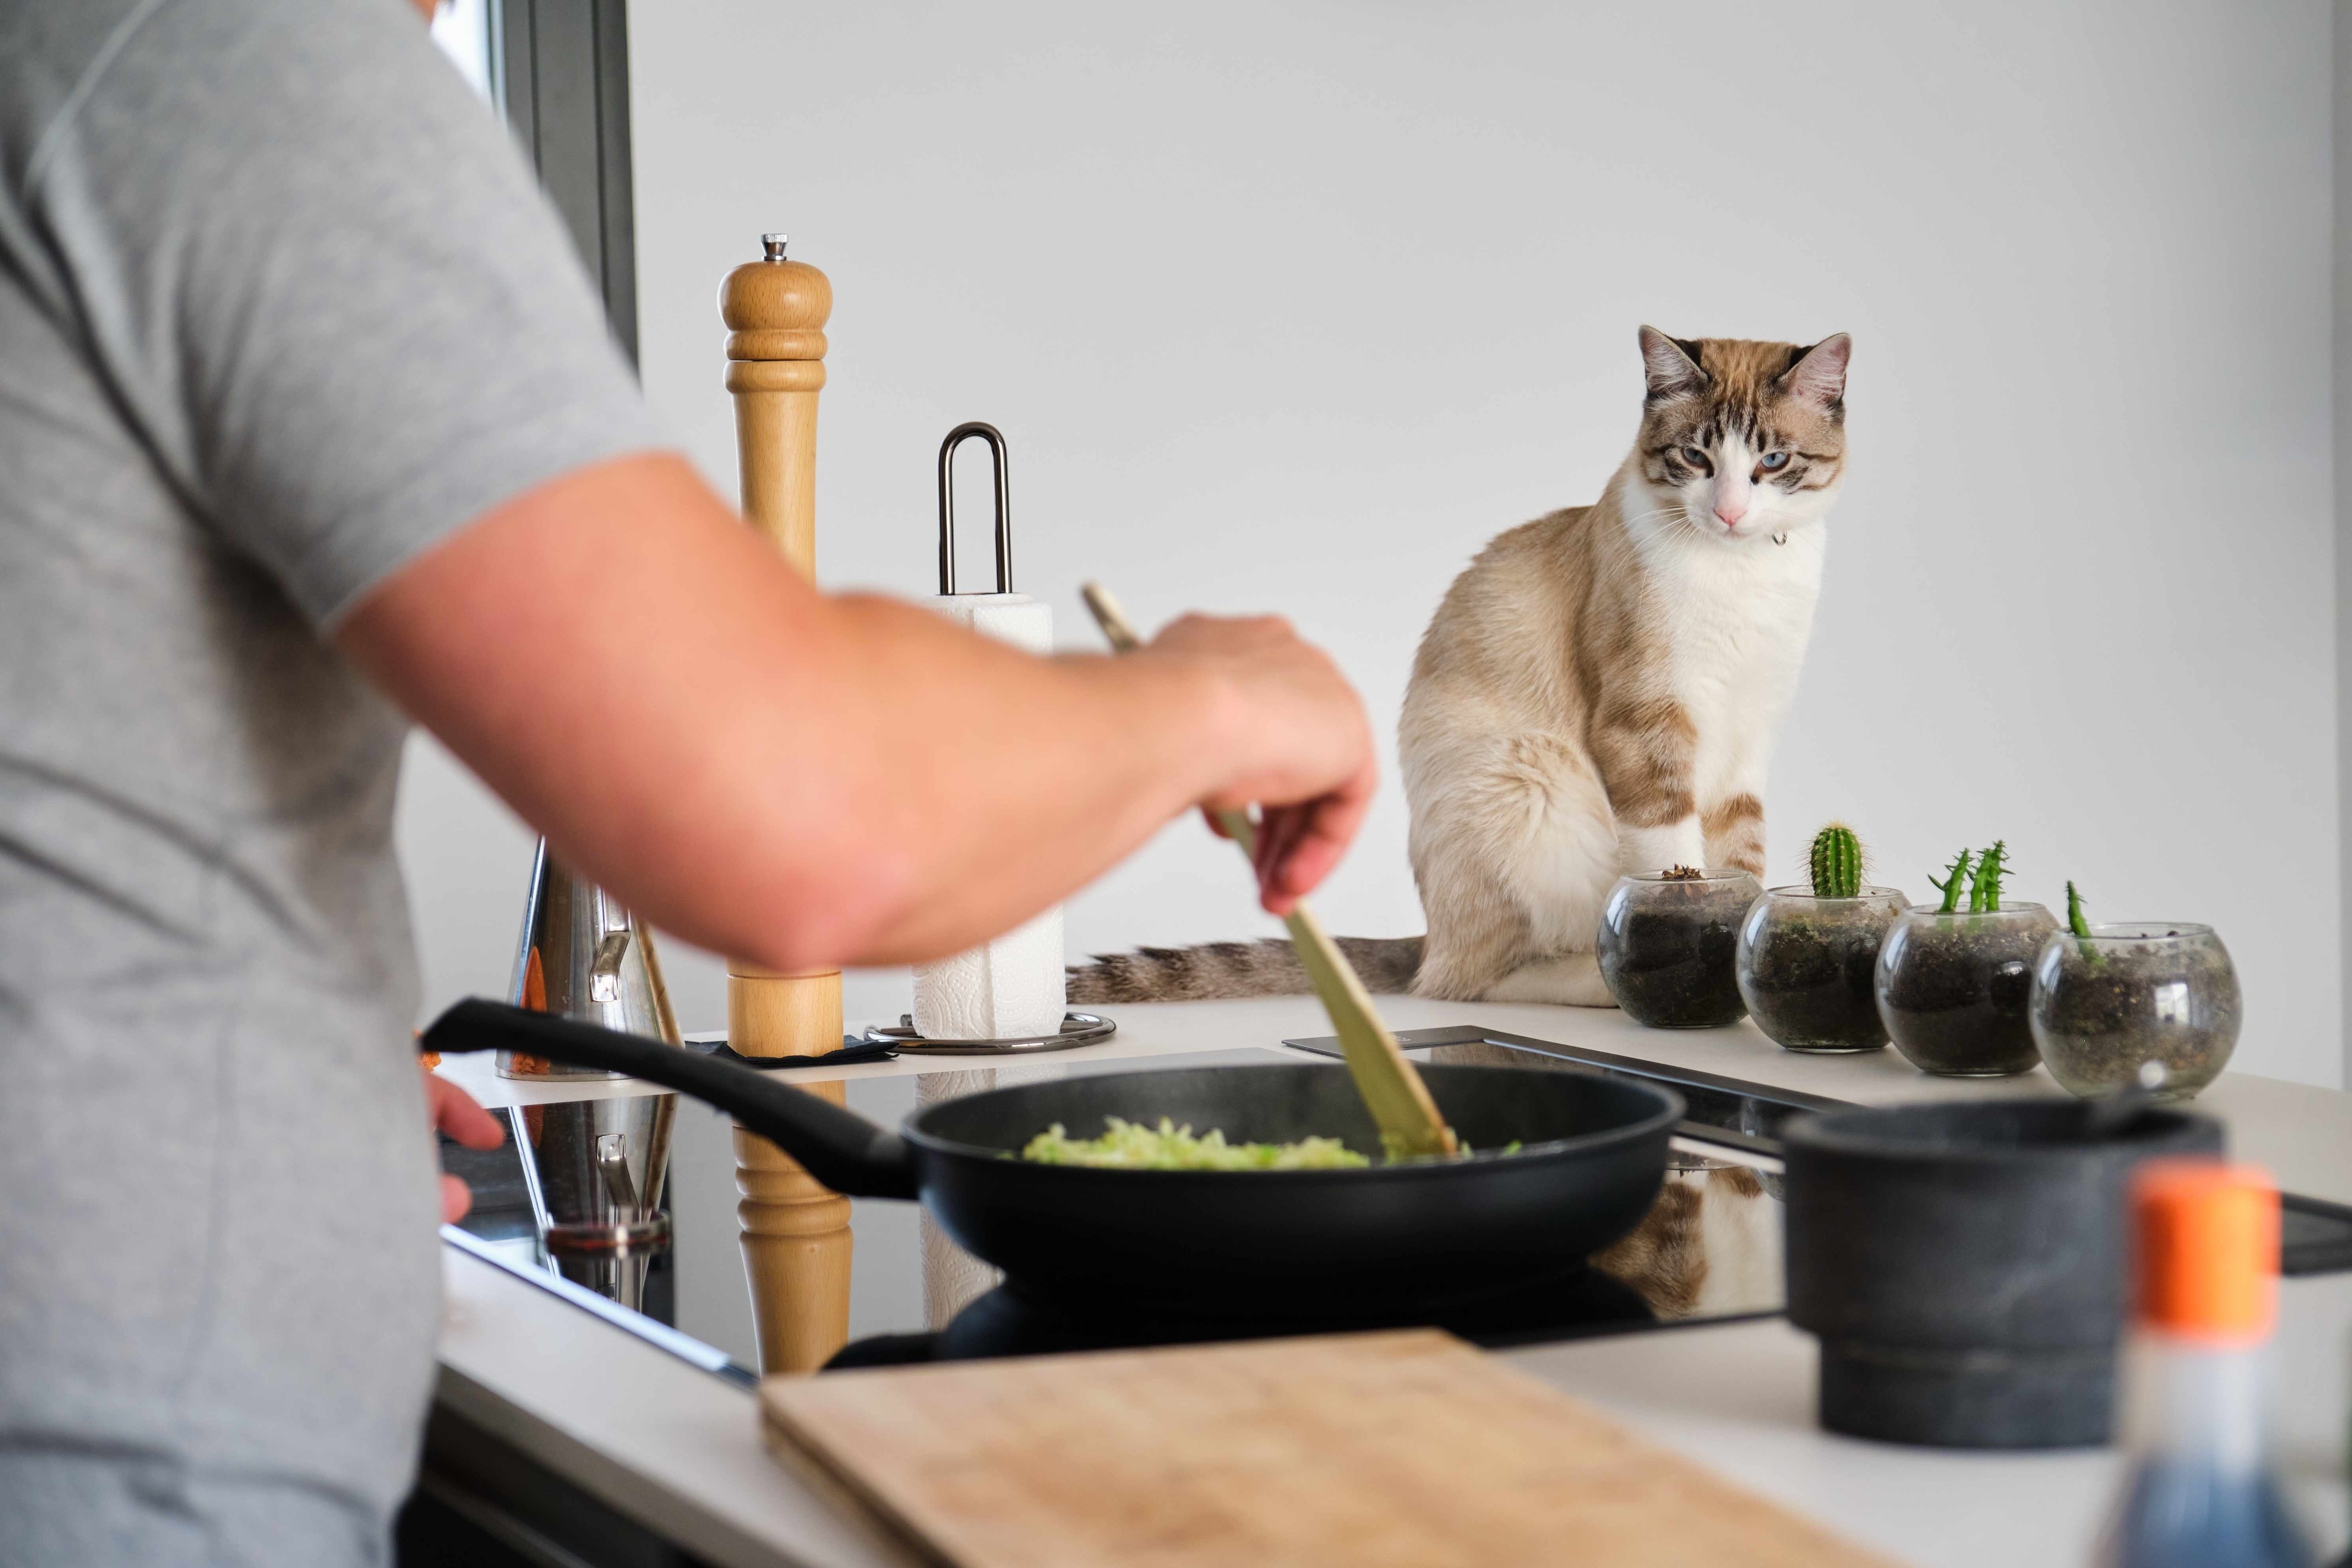 cat watching someone cooking